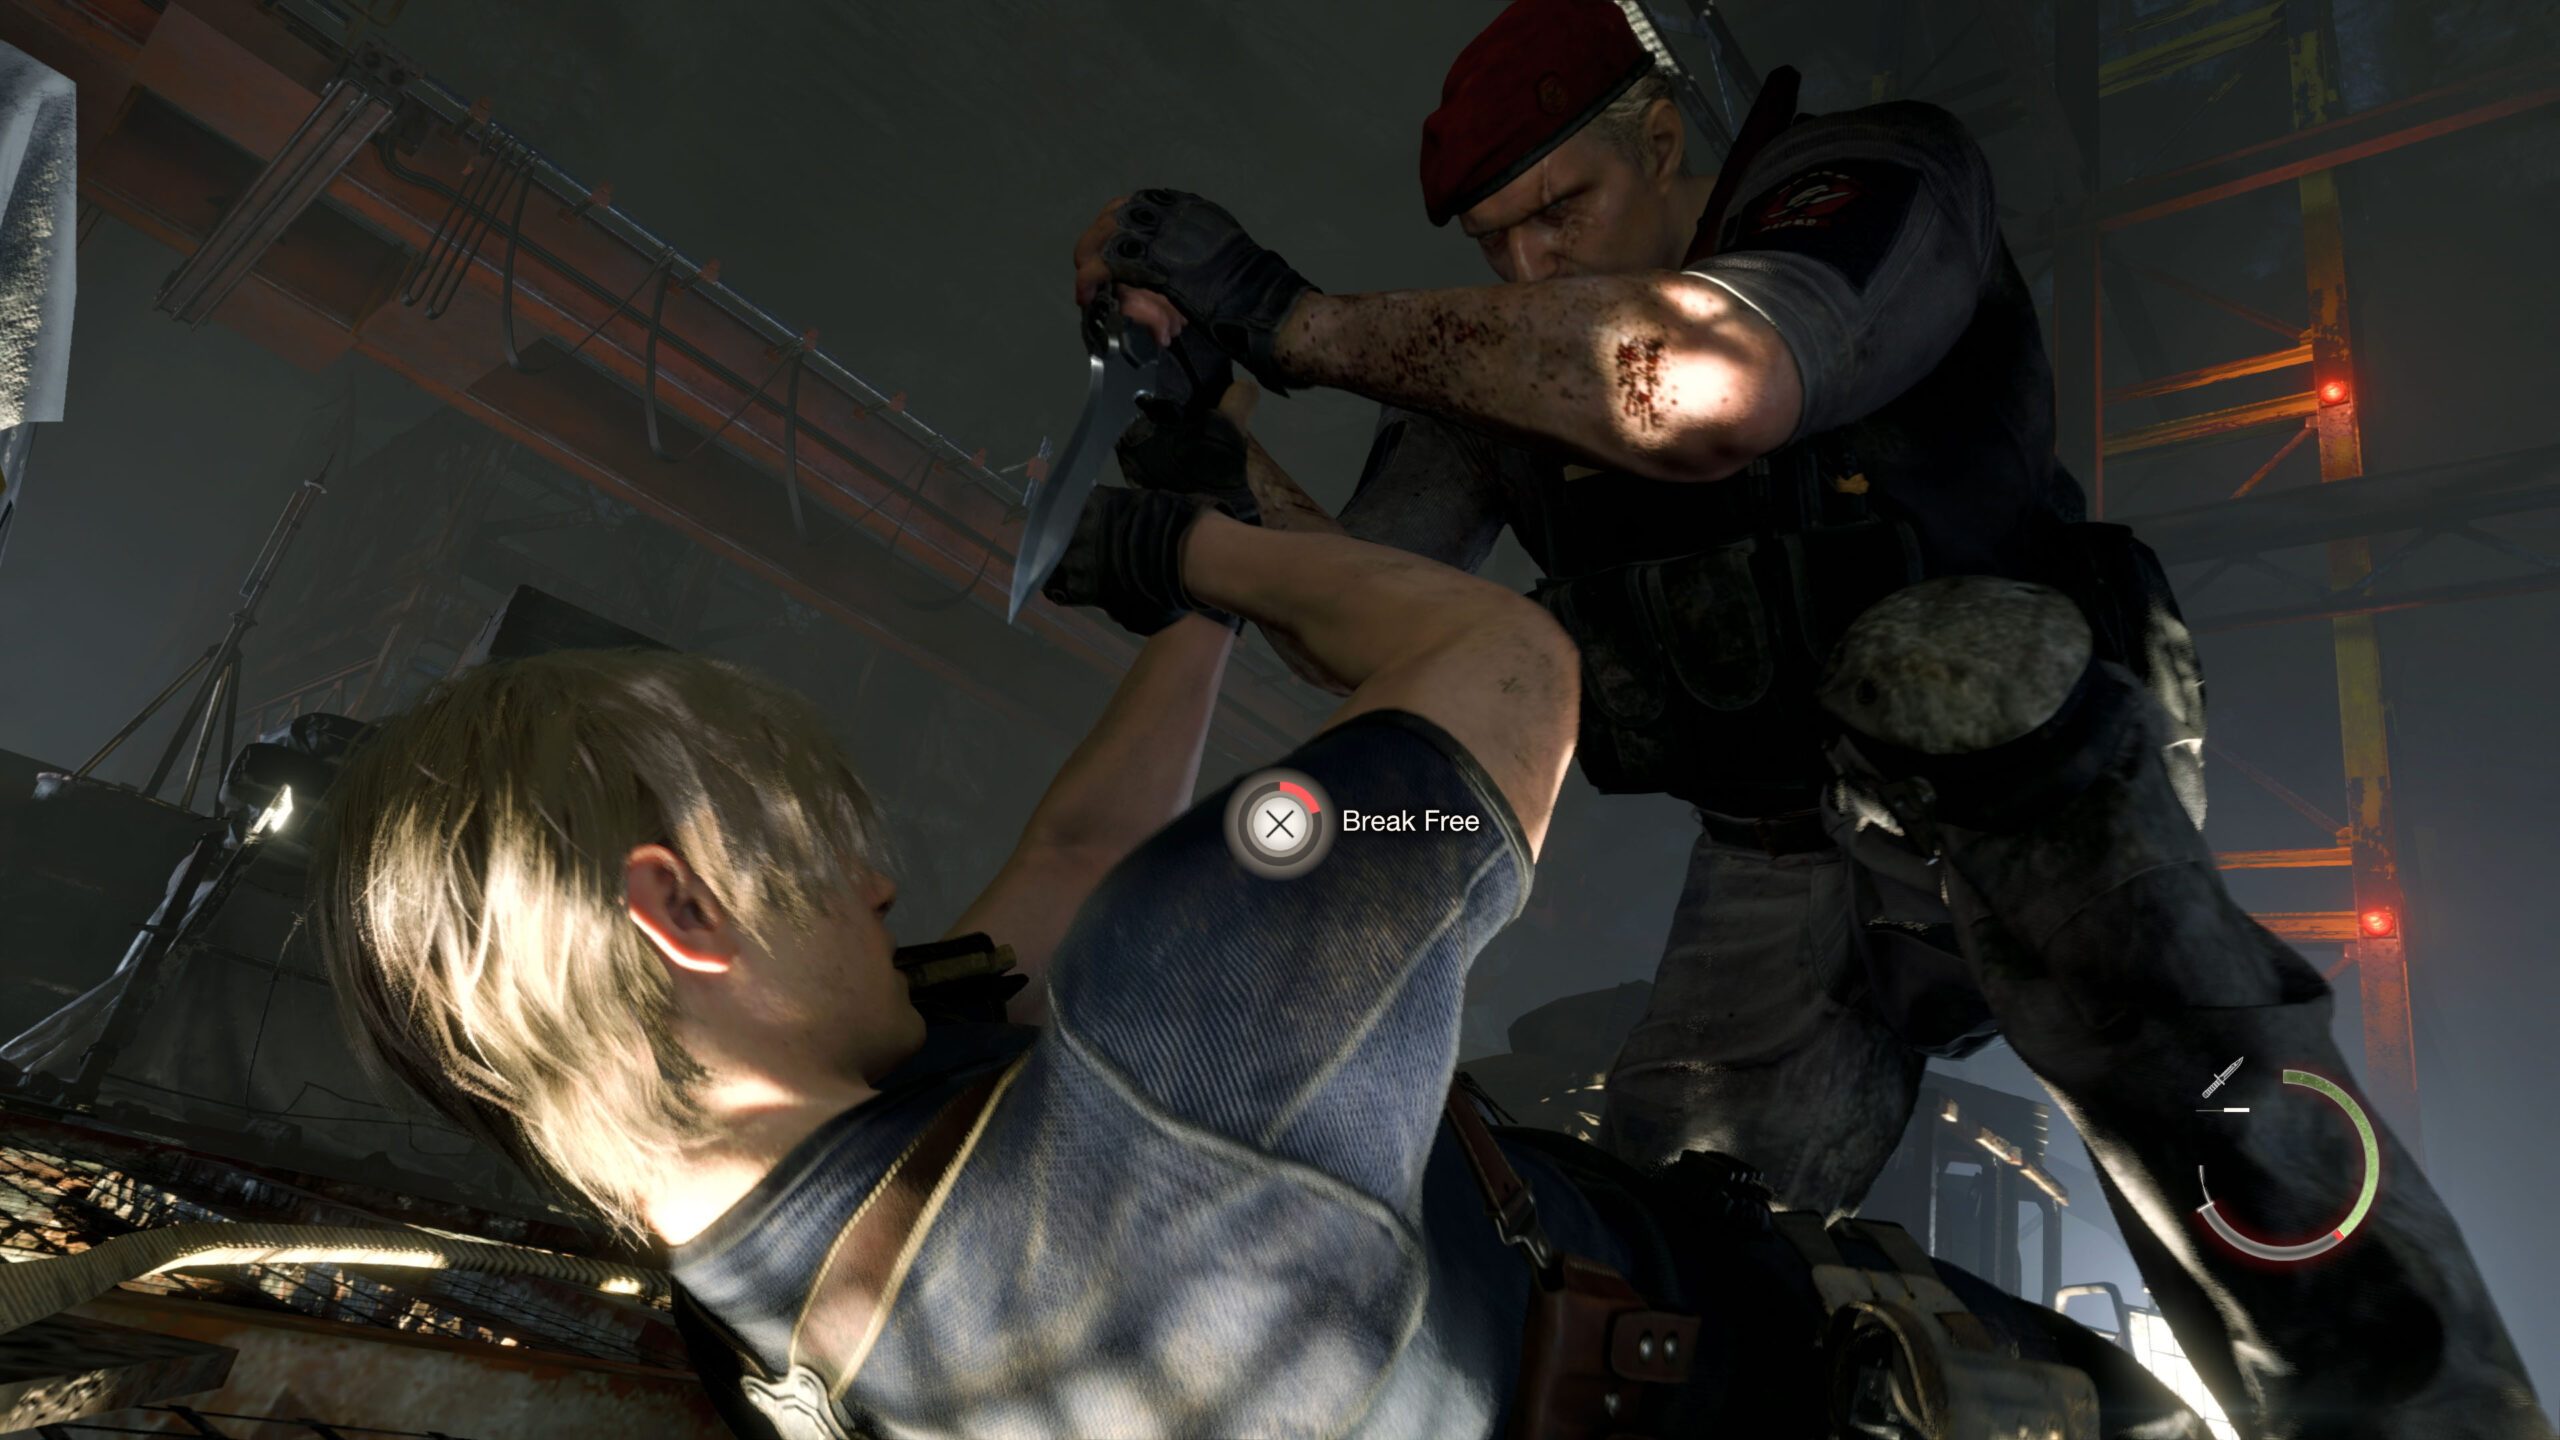 An X button prompt to Break Free flashes on screen as Leon and Krauser tussle, the ex-RCPD officer forced back on the floor barely fending off Krauser’s knife attack.